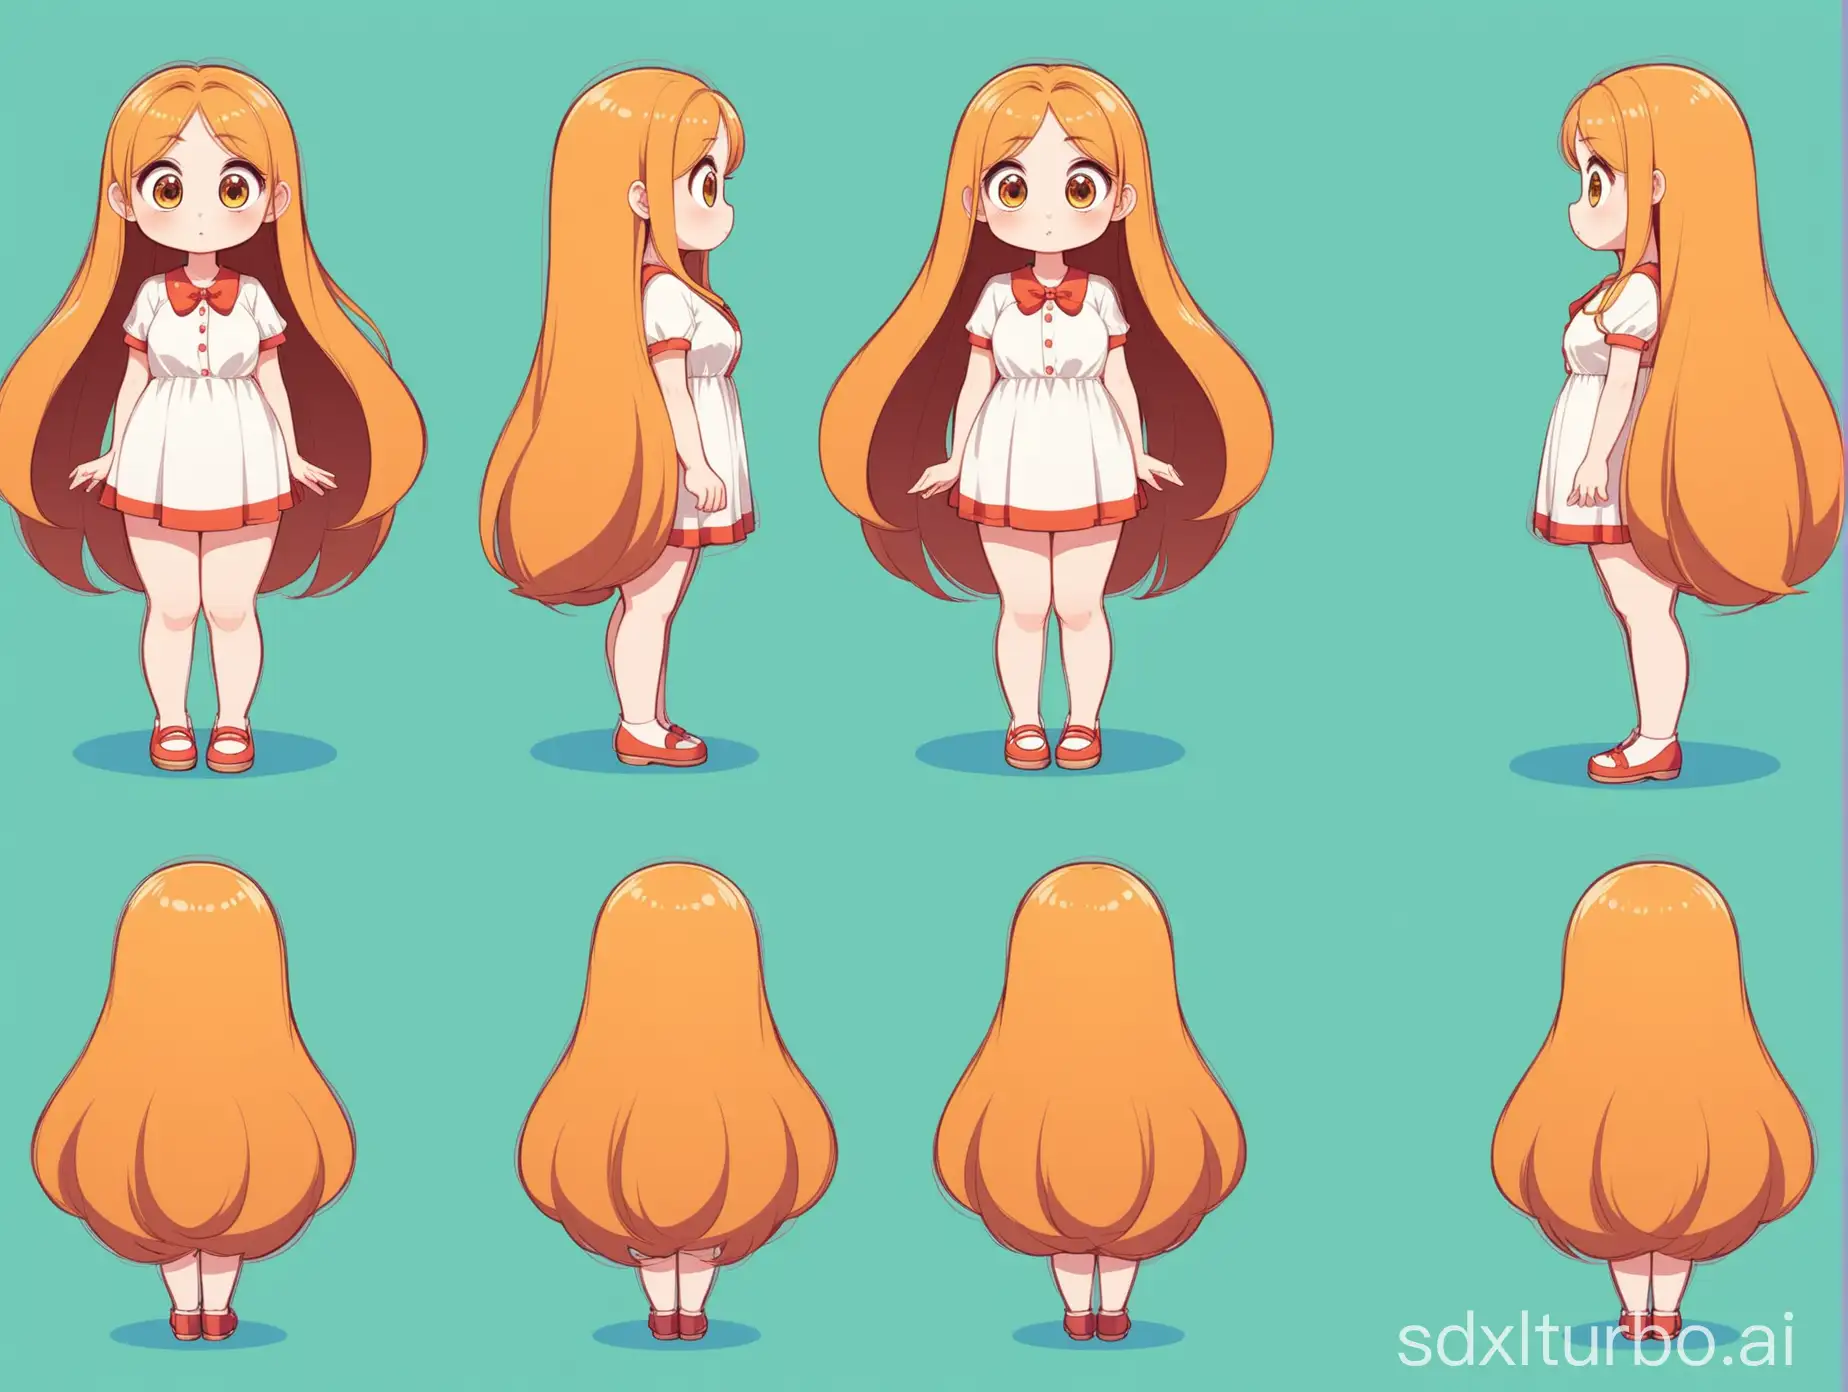 A girl, long hair, big eyes, cute, full body, five views, front view, side view, rear view, three-quarter Angle picture, cartoon animation
